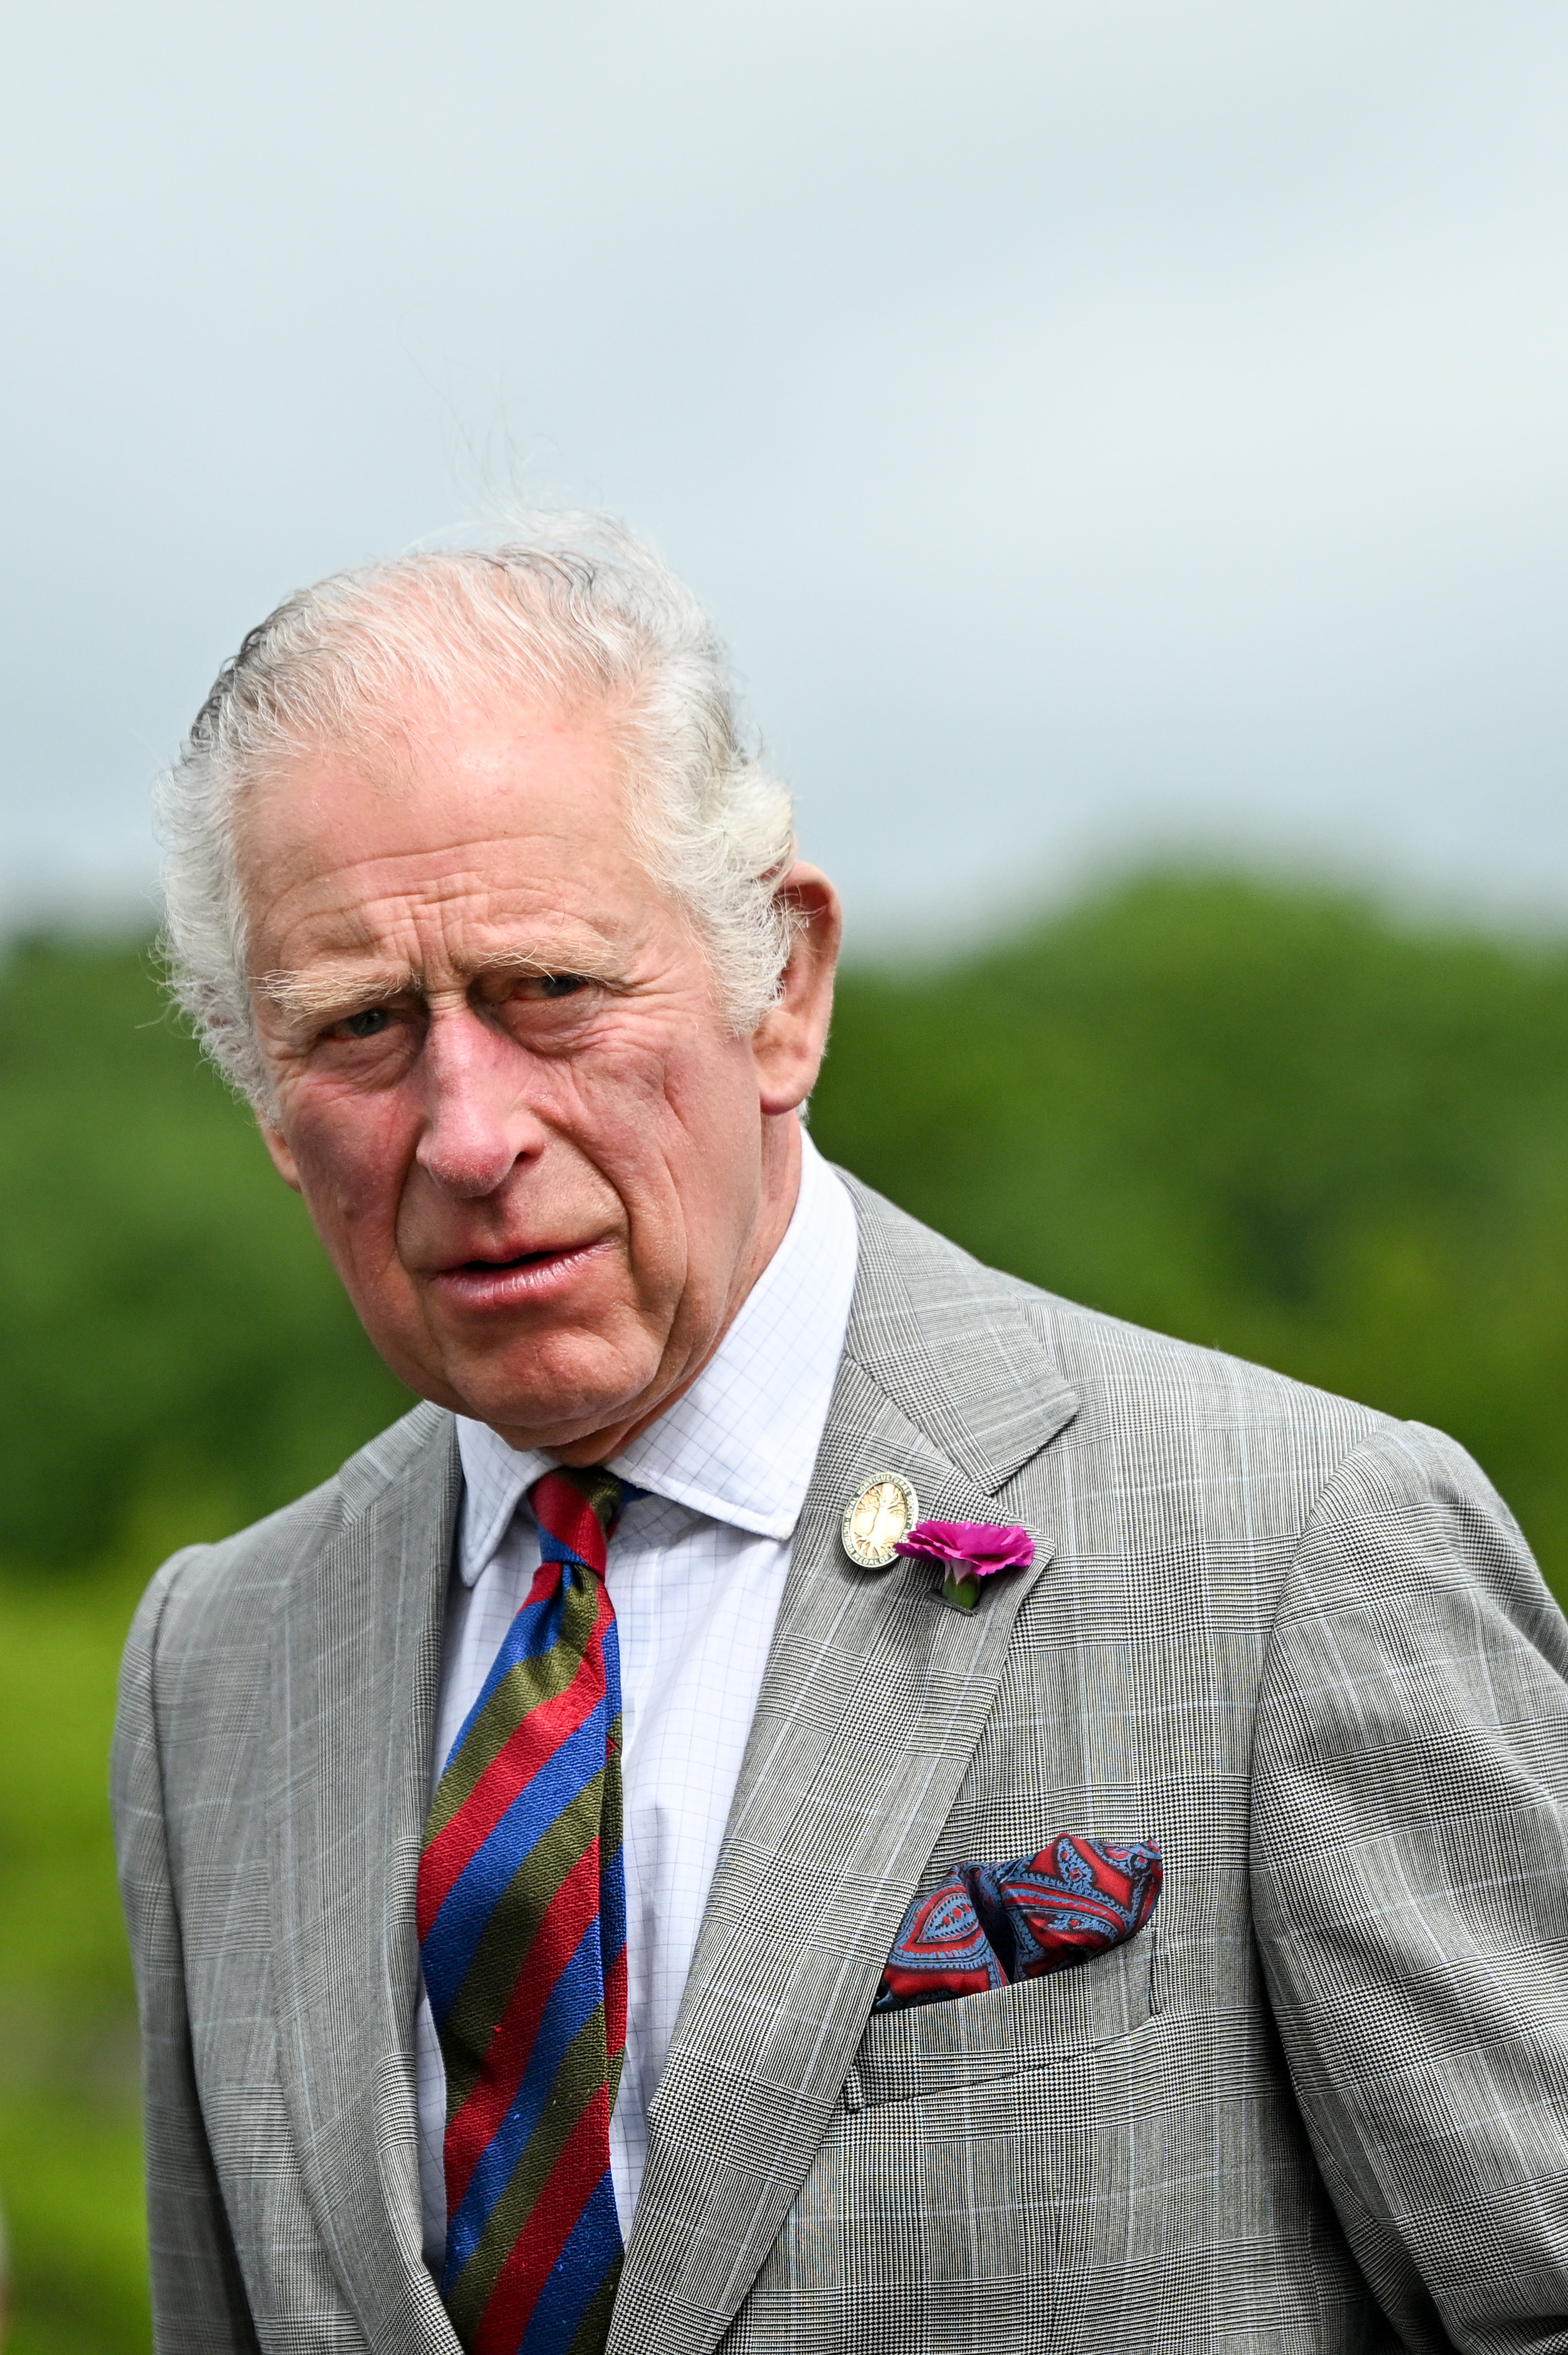 Prince Charles, then the Prince of Wales, during a visit to the National Botanic Garden of Wales in Llanarthne, Wales, on July 06, 2022 | Source: Getty Images